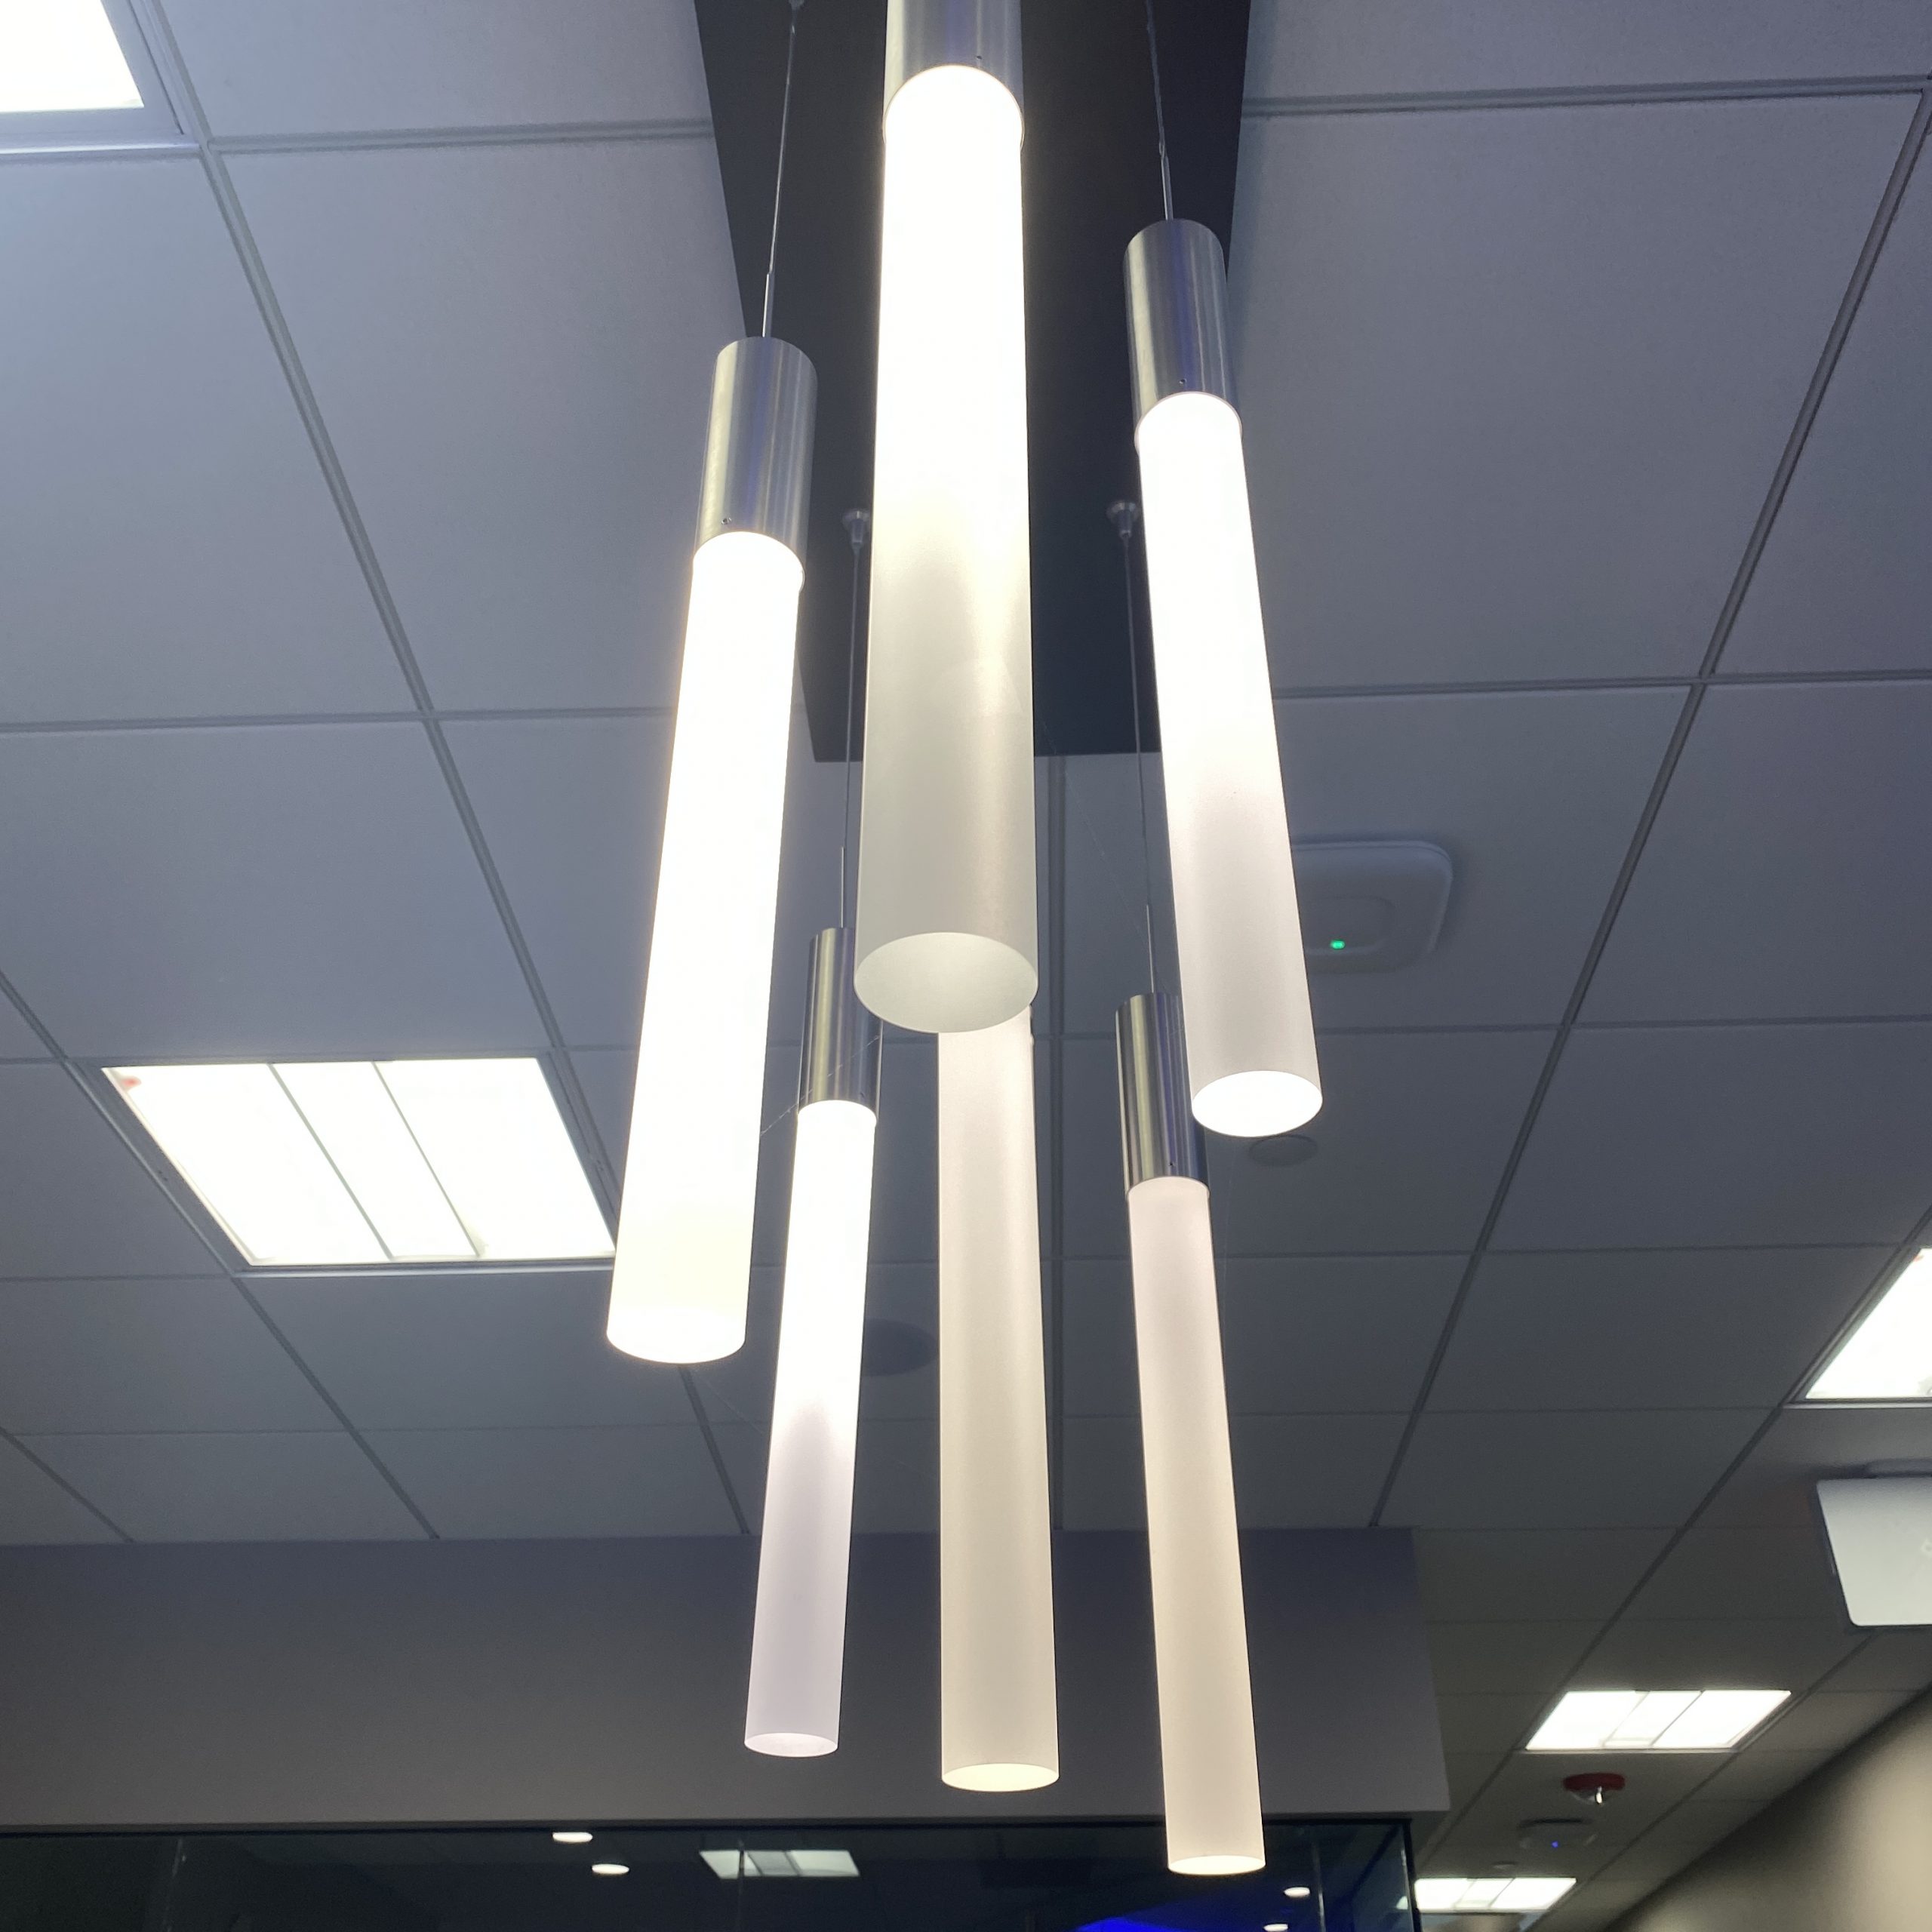 Replacement Light Fixtures Services in Buffalo Grove